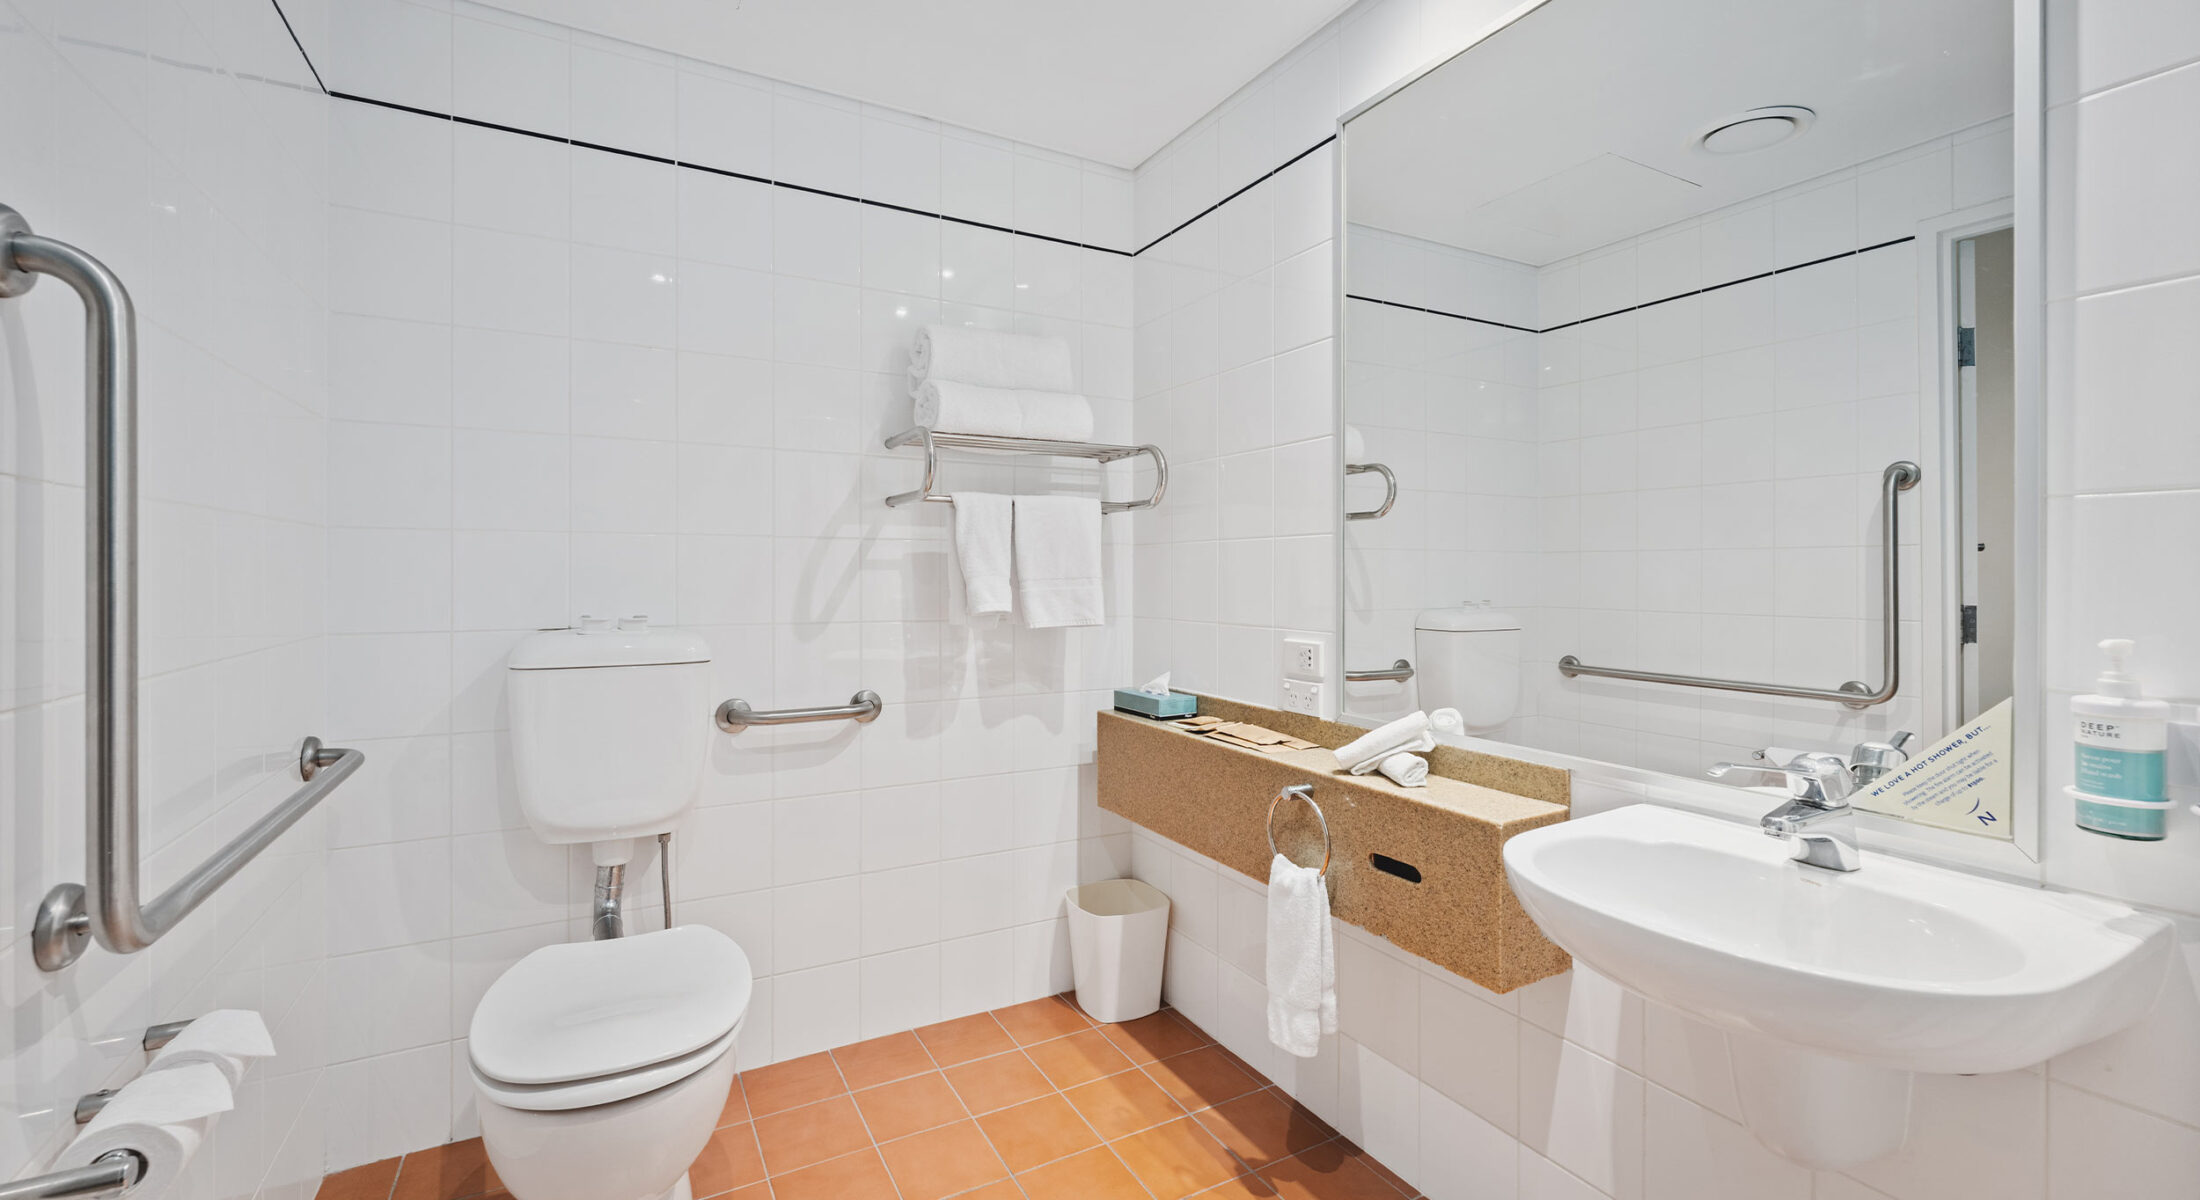 Novotel Canberra accessible room bathroom with rails and more space for mobility aids